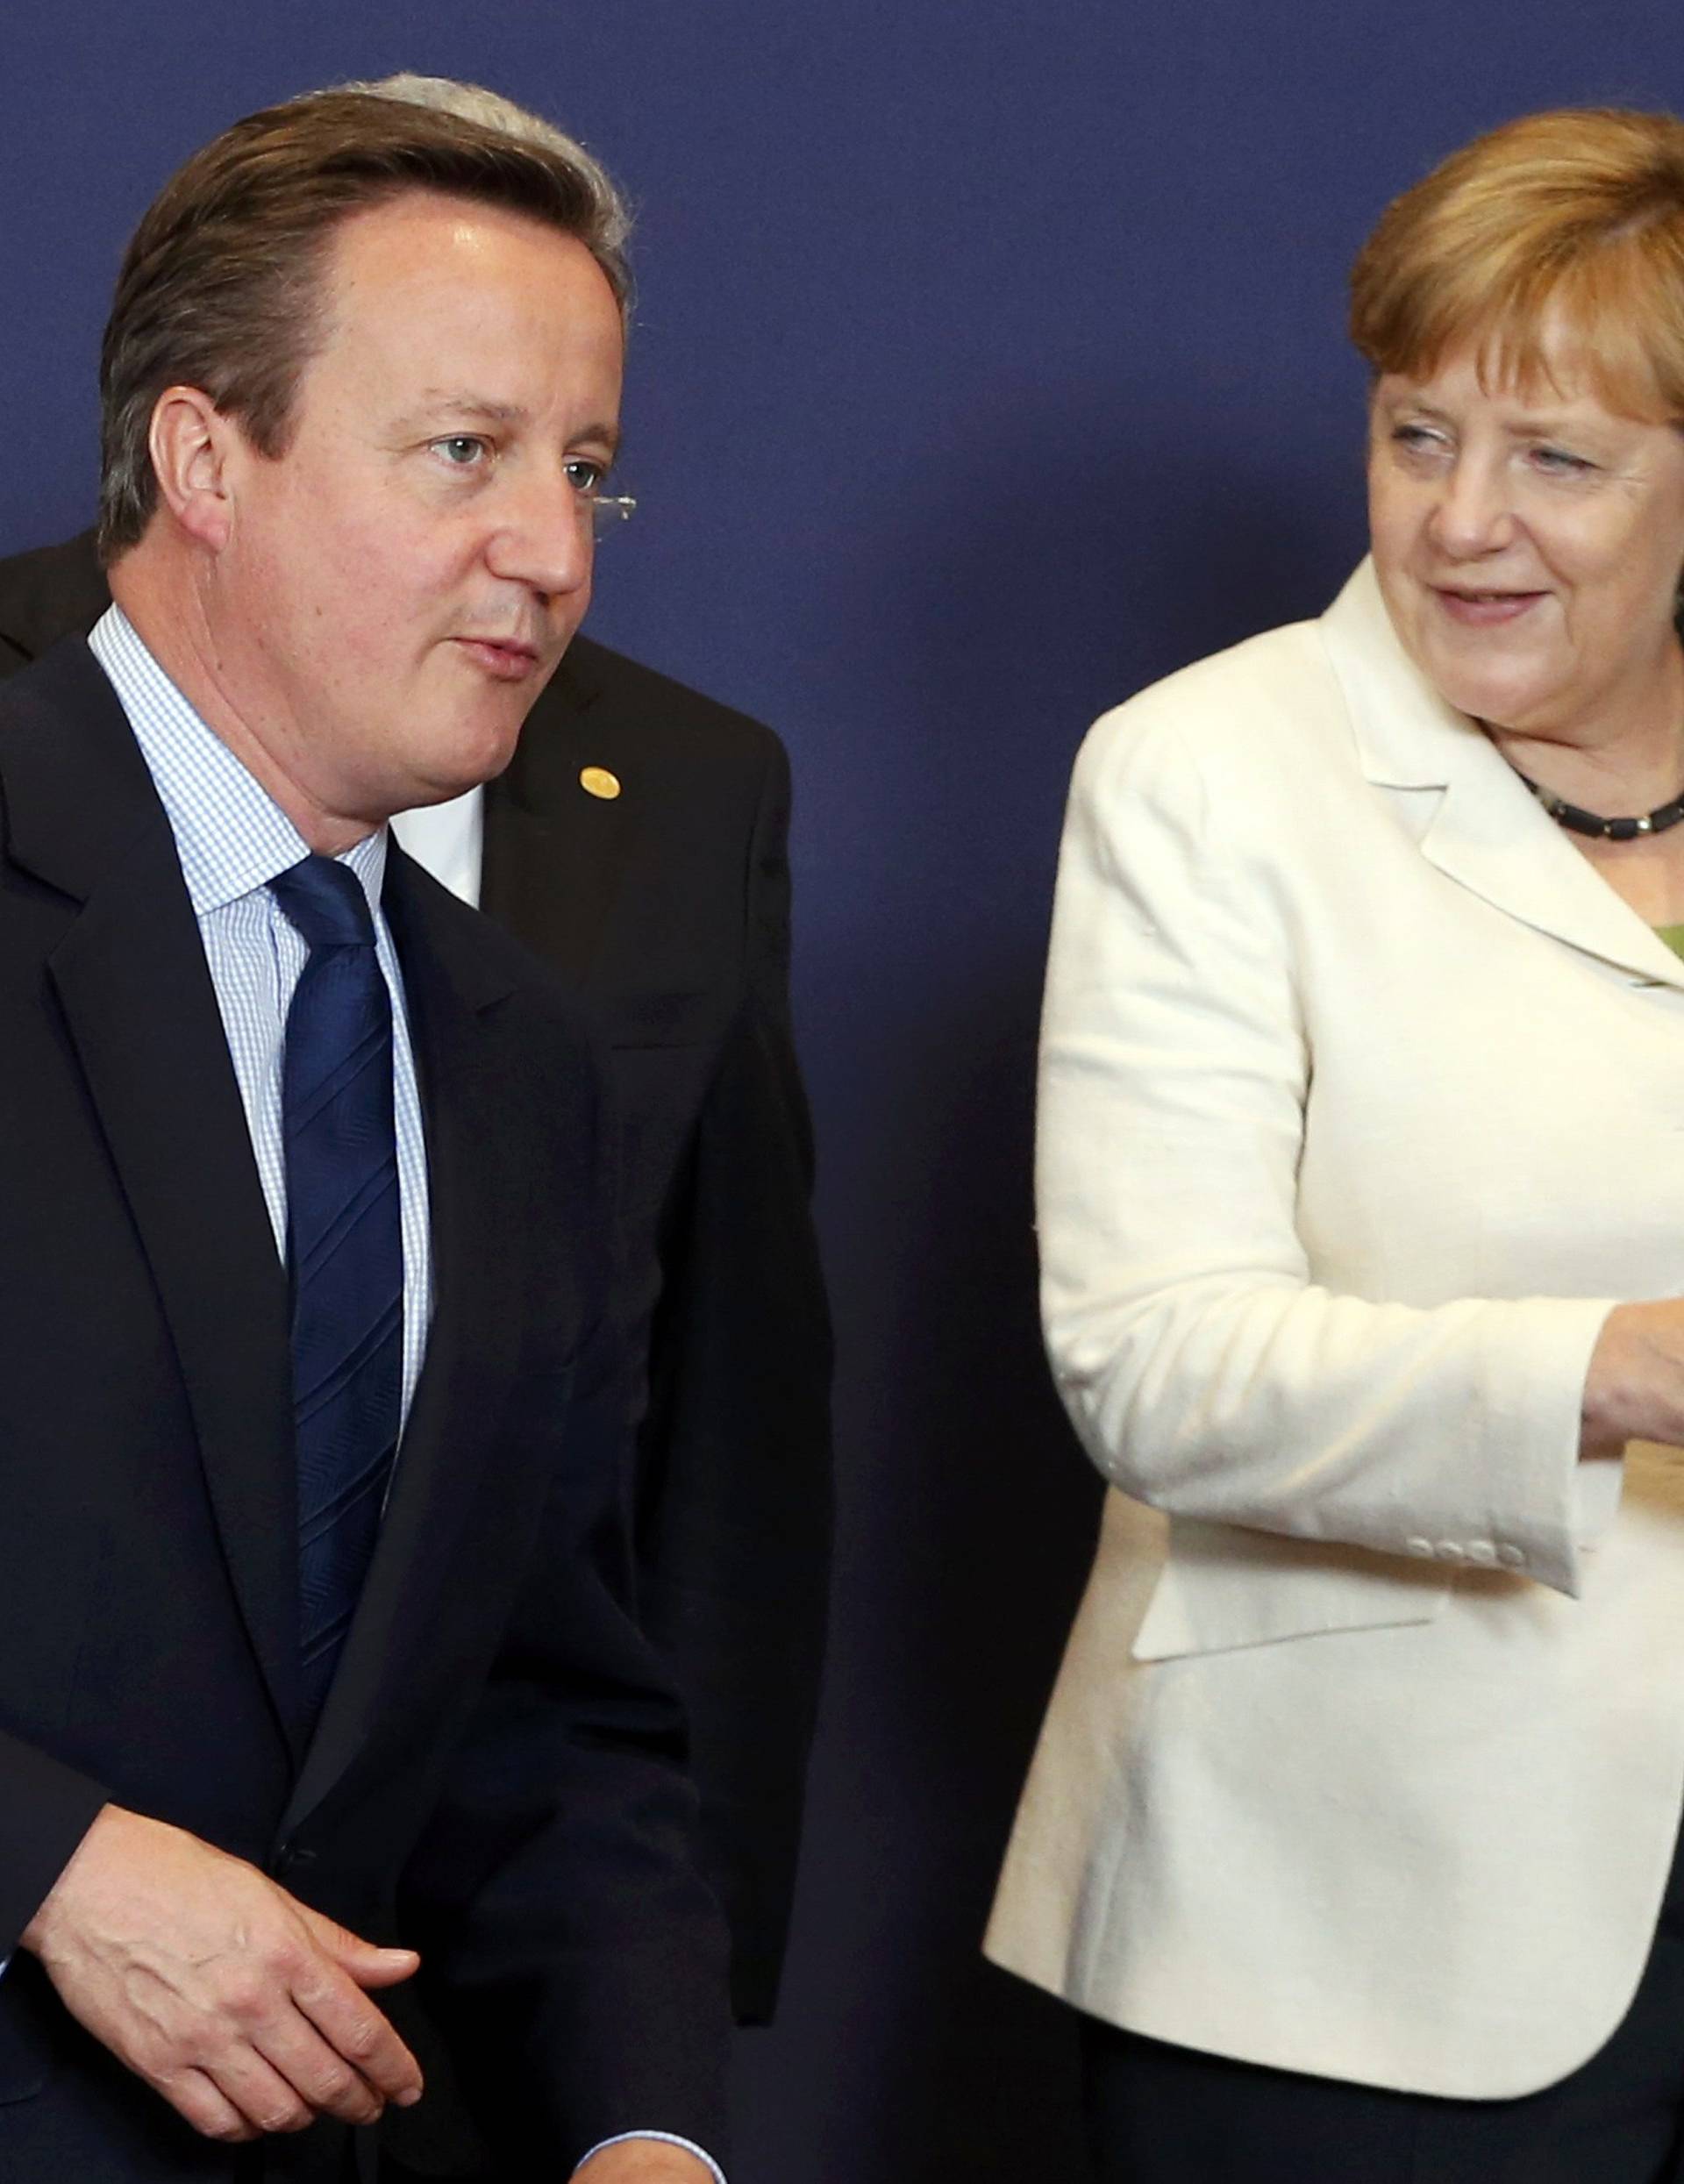 British PM Cameron and German Chancellor Merkel take place for the traditional family photo at he EU summit in Brussels